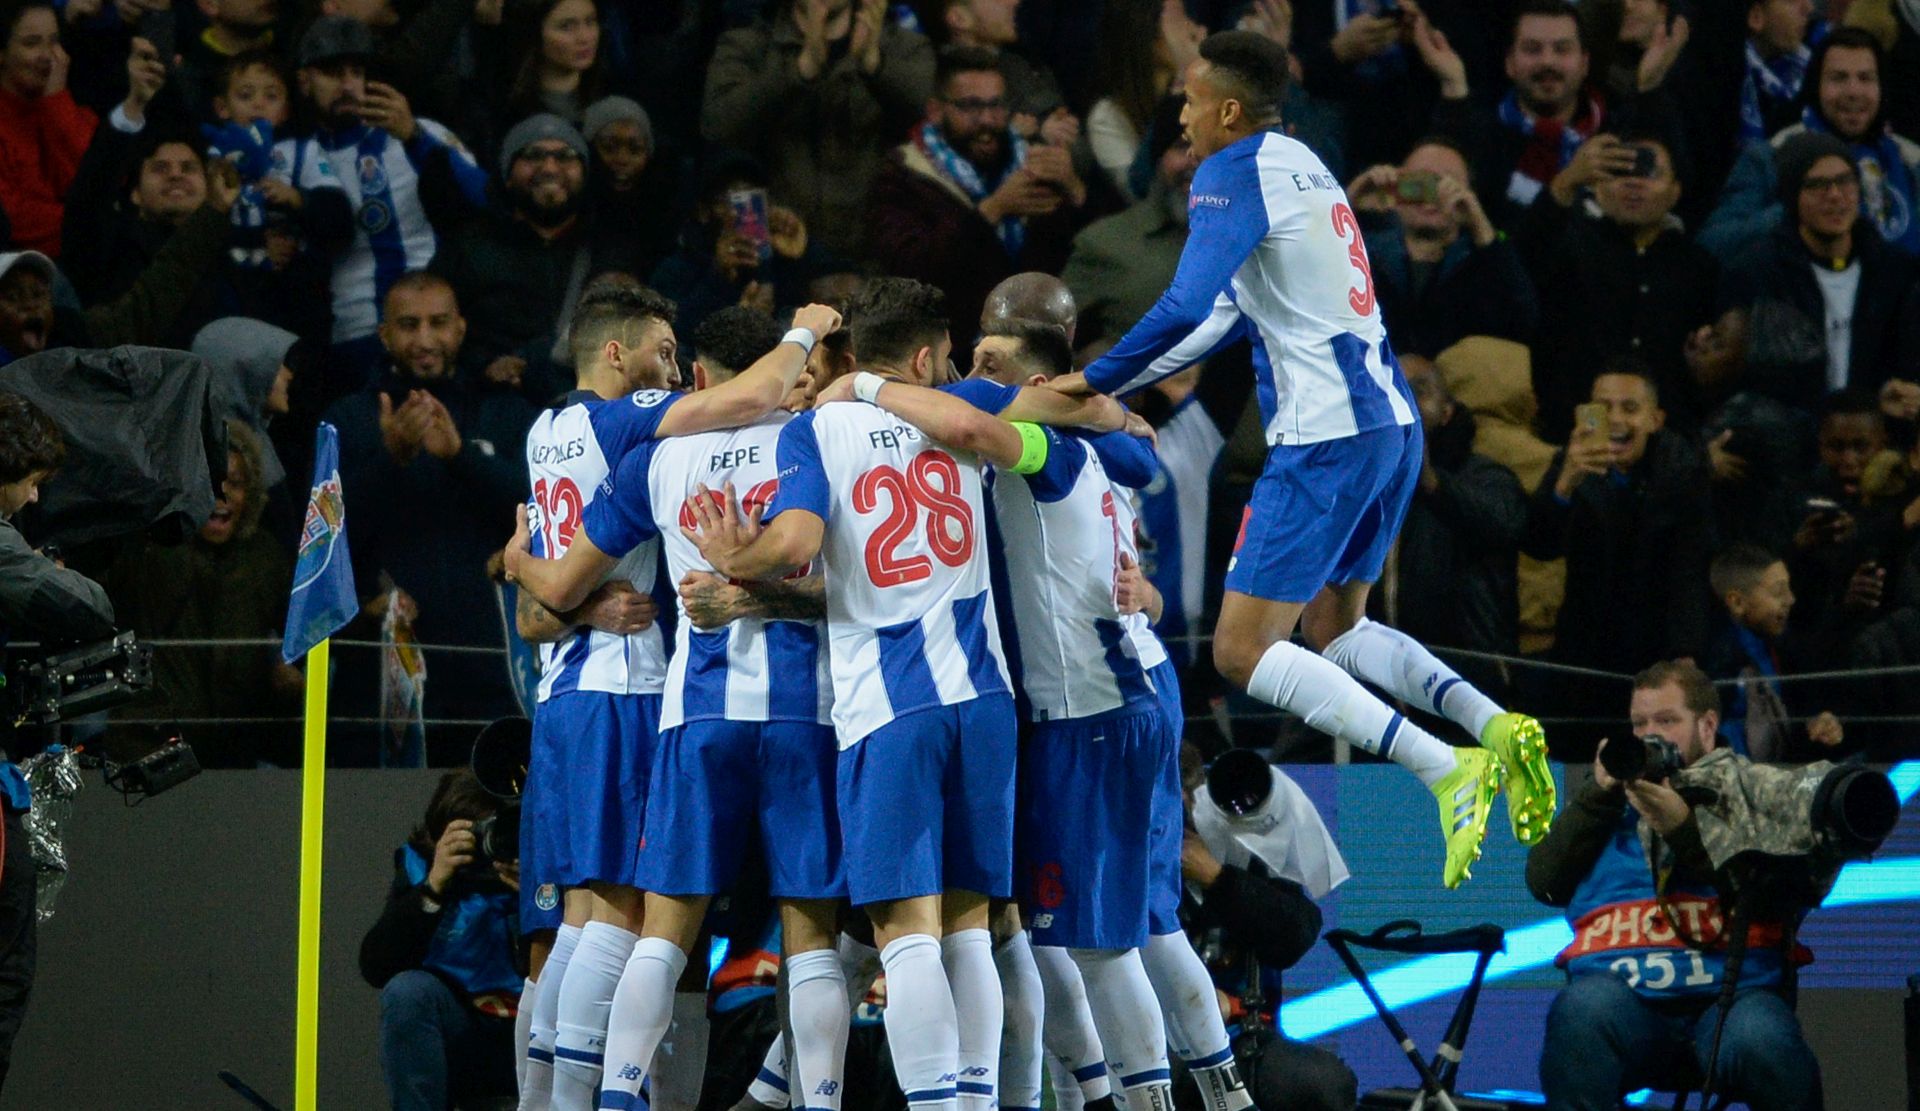 epa07418152 FC Porto's players celebrate a goal against Roma during their Champions League lround of 16 second leg soccer match, held at Dragao stadium, Porto, Portugal, 6 March 2019.  EPA/FERNANDO VELUDO